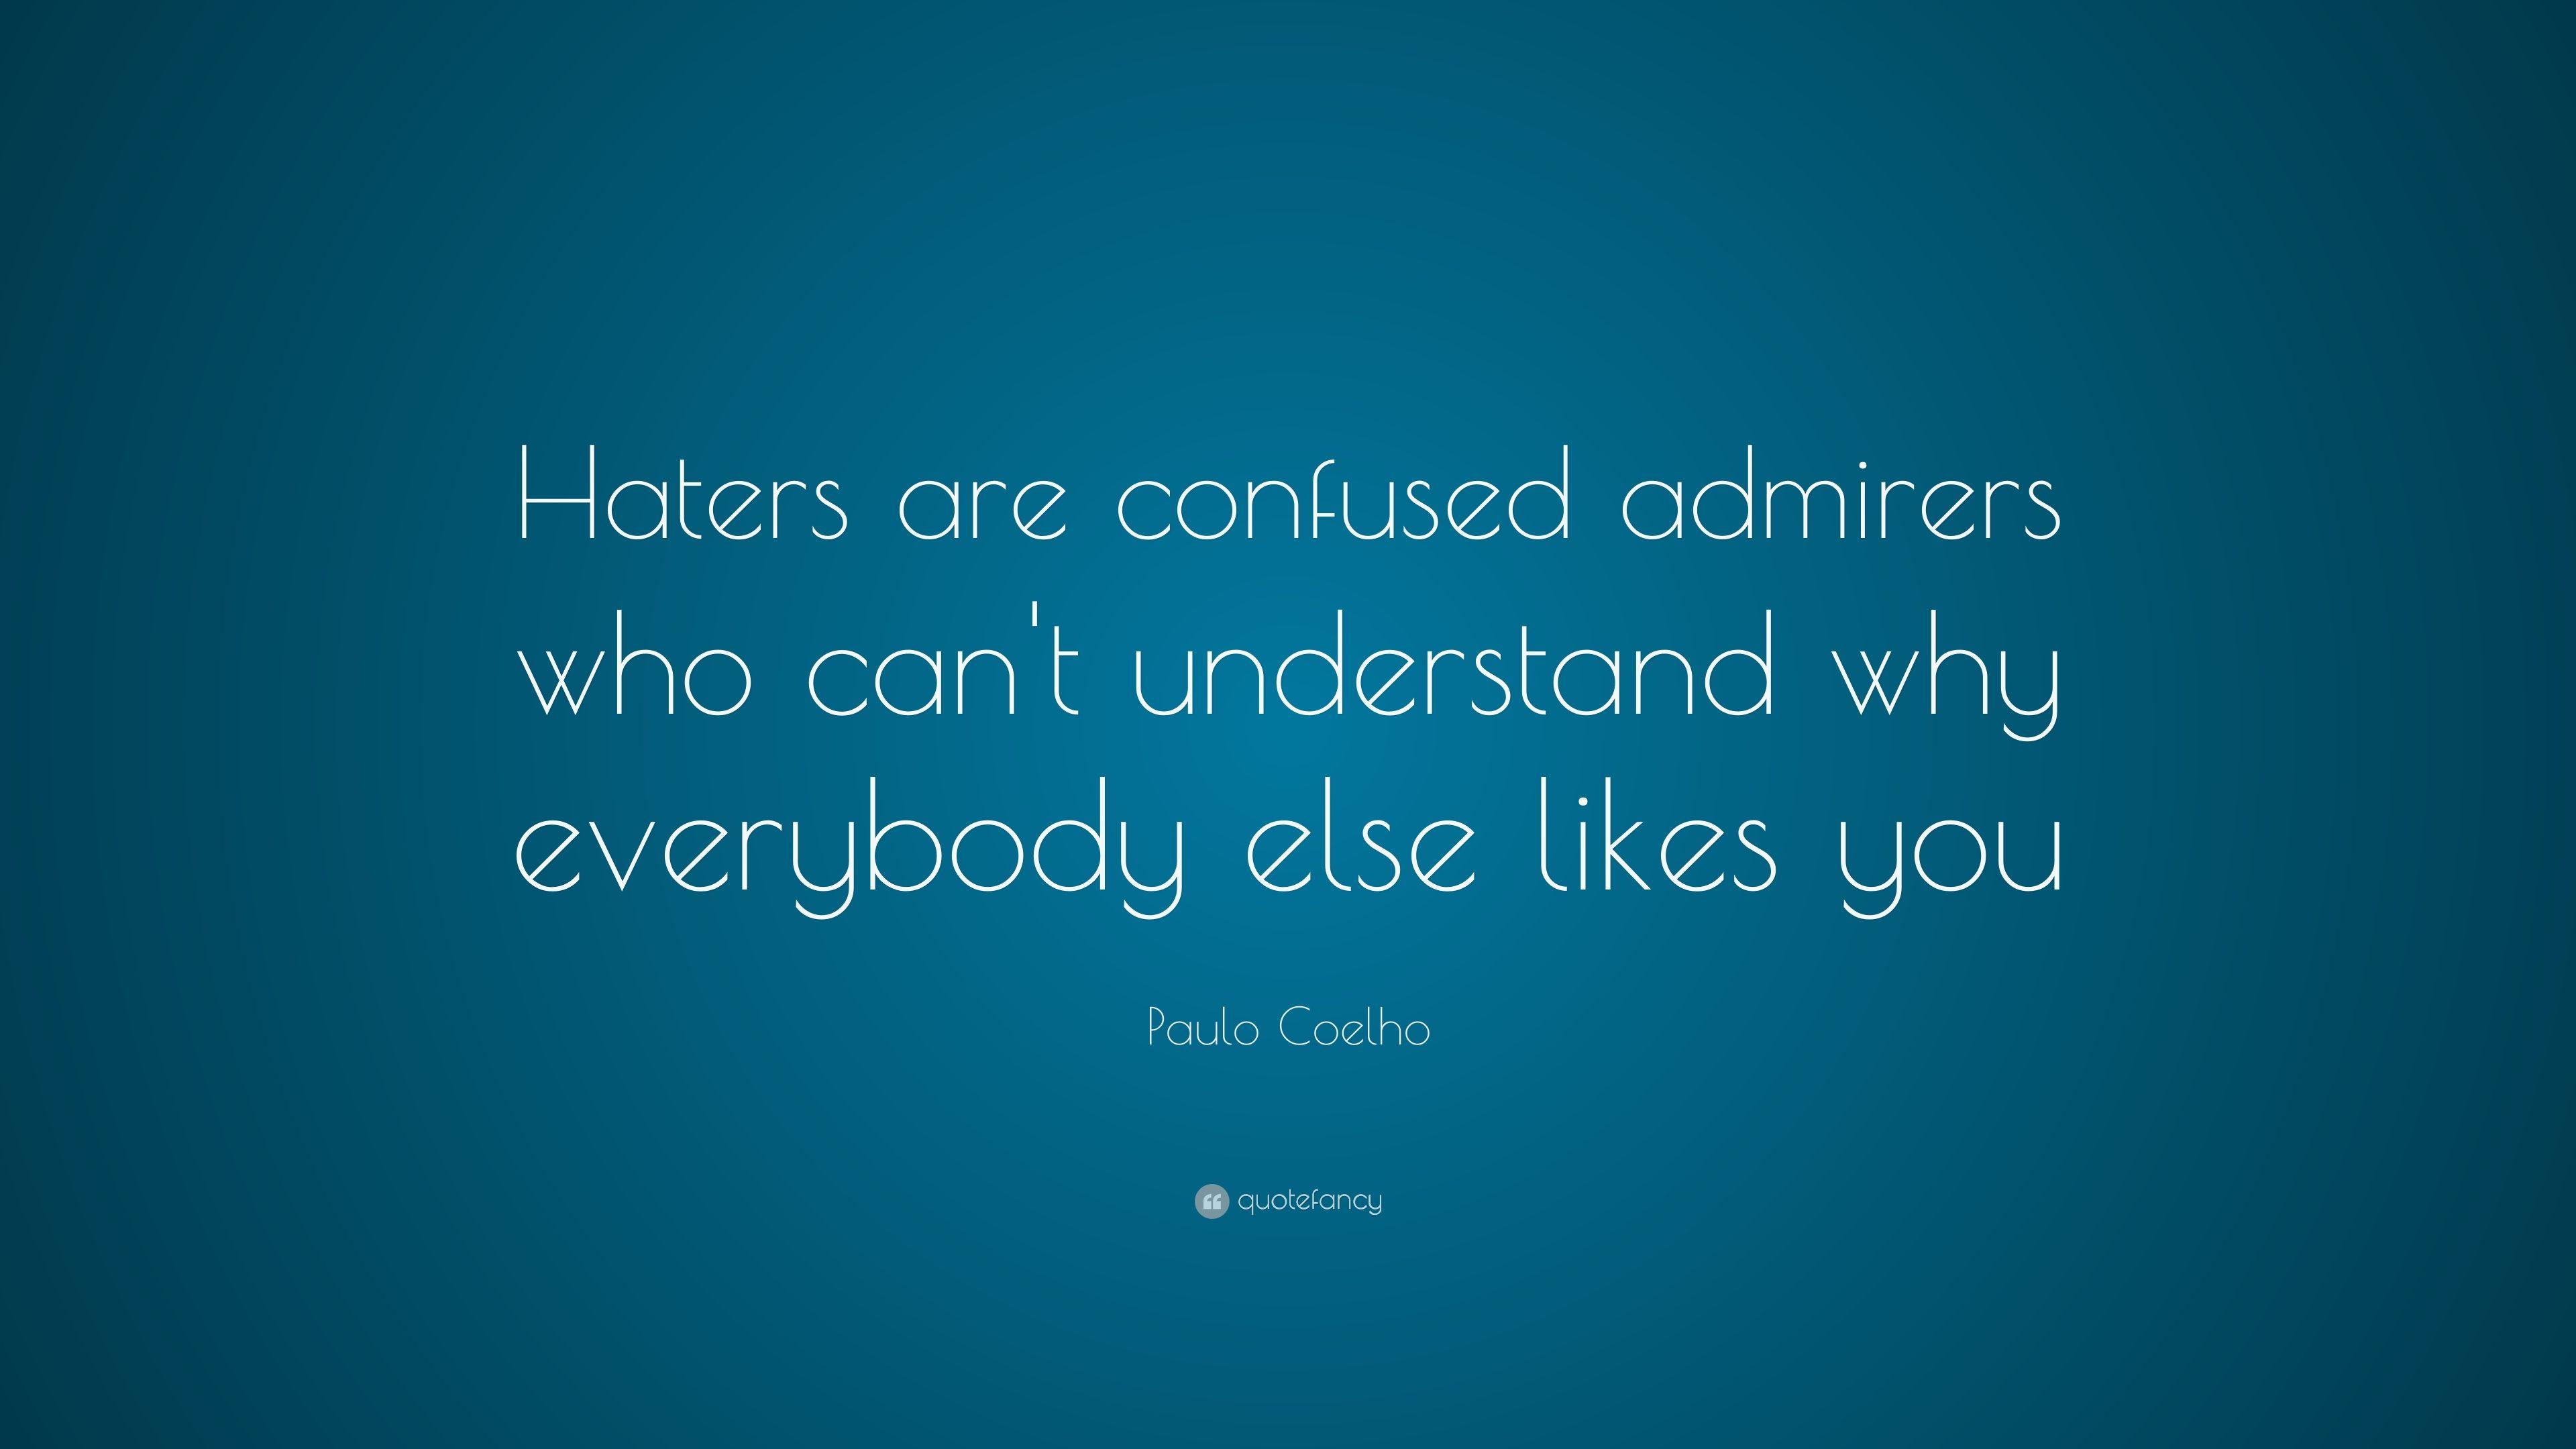 Paulo Coelho Quote: “Haters are confused admirers who can't